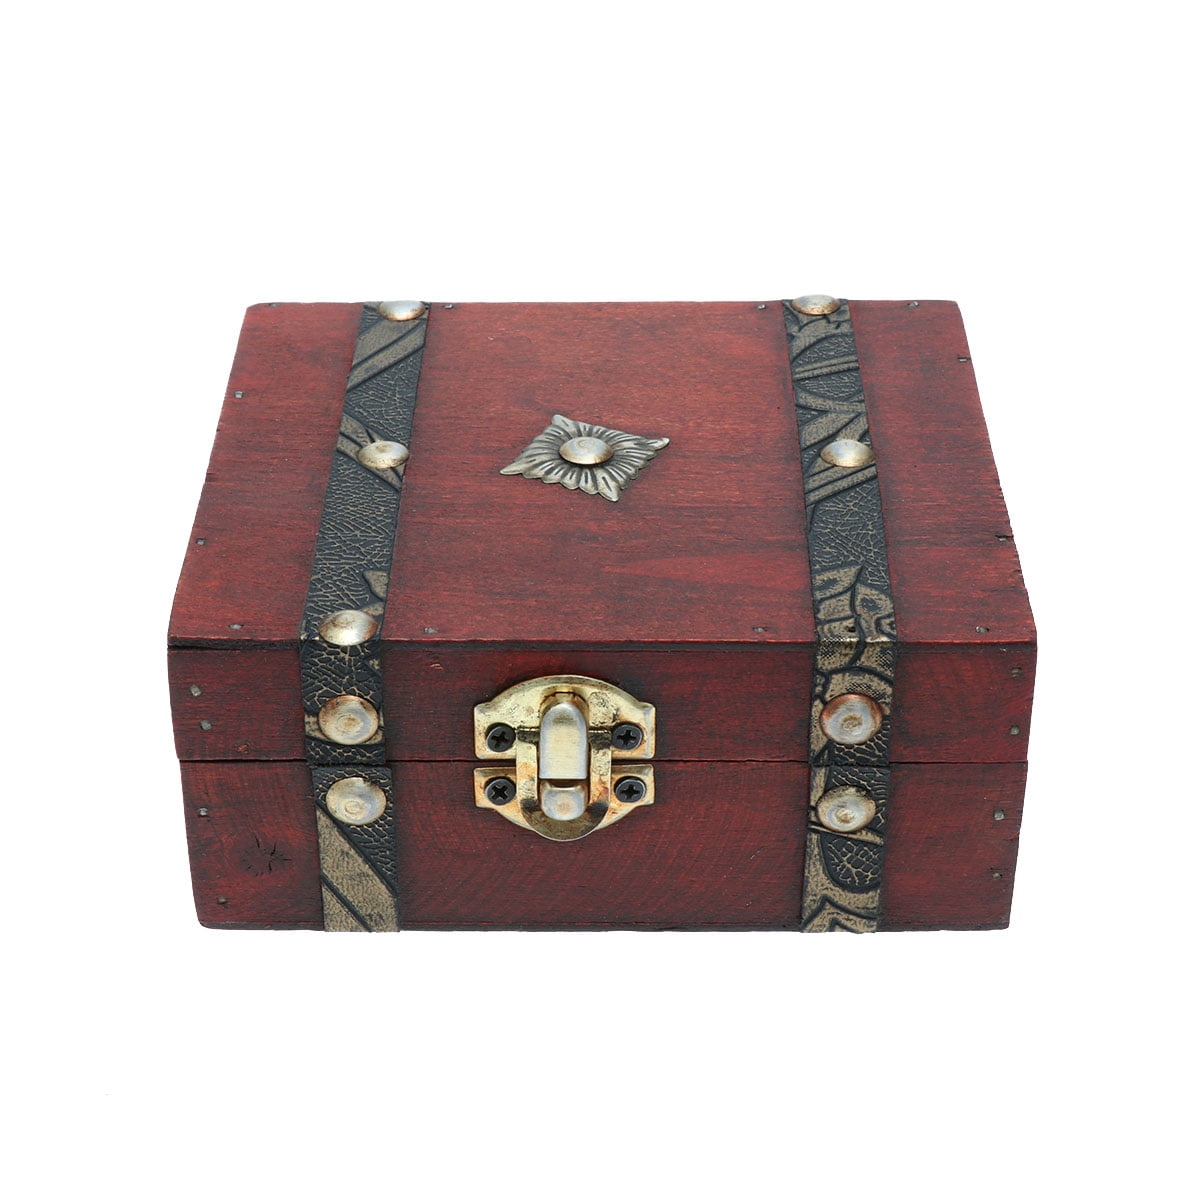 non-branded Antique Storage Box Storage Boxes Unique Archaistic Double Belt Wooden Container for Sitting Room Garden Bedroom Schoolroom Desk Drawer 